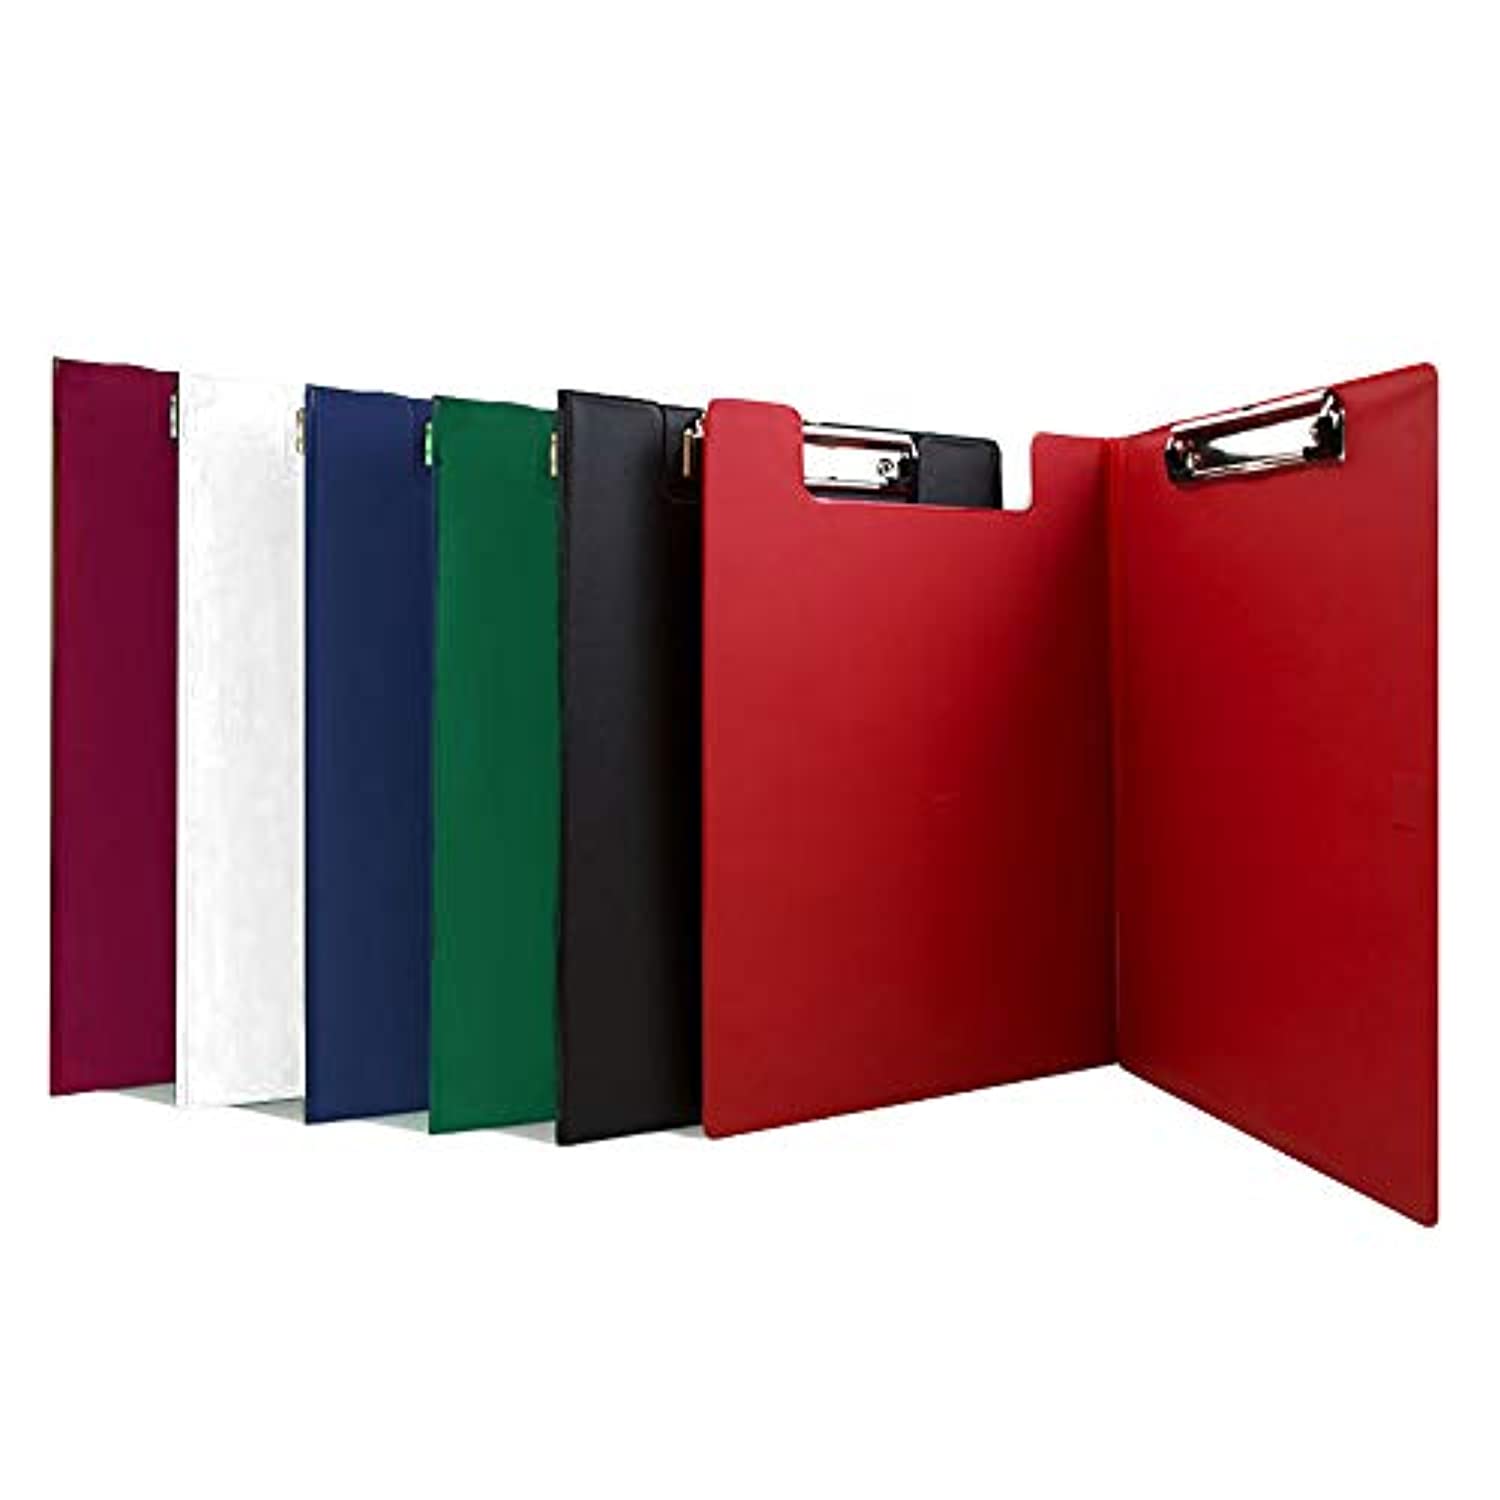 BAZIC Assorted Color PVC Clipboard Low Profile Clip, A4 Letter Size, Business Office School Teacher Student College, Assorted 4 Colors, 24-Pack.